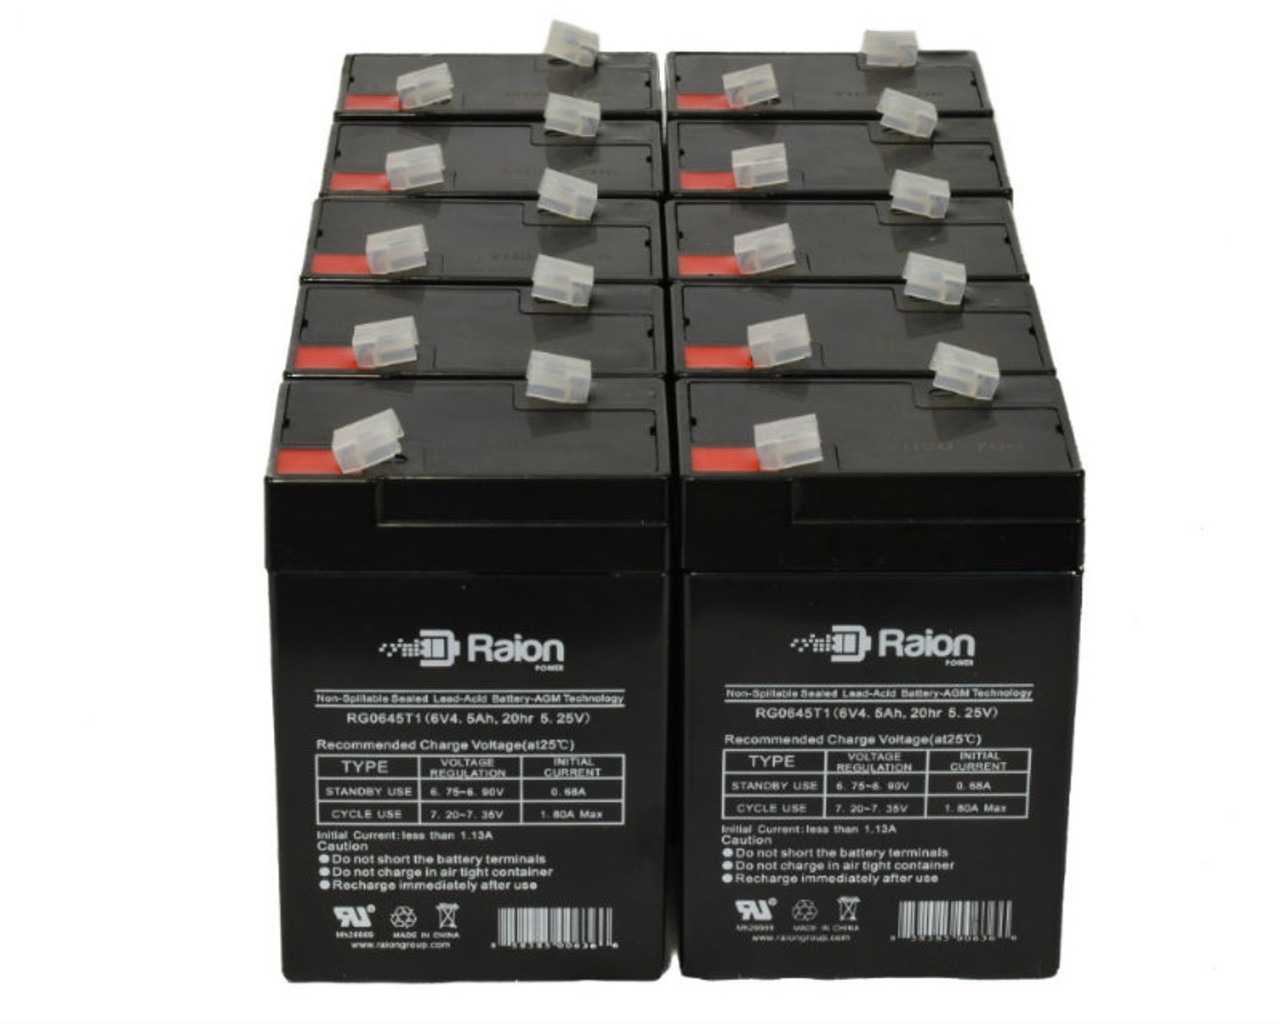 Raion Power 6 Volt 4.5Ah RG0645T1 Replacement Battery for RYTON RT640 - 10 Pack